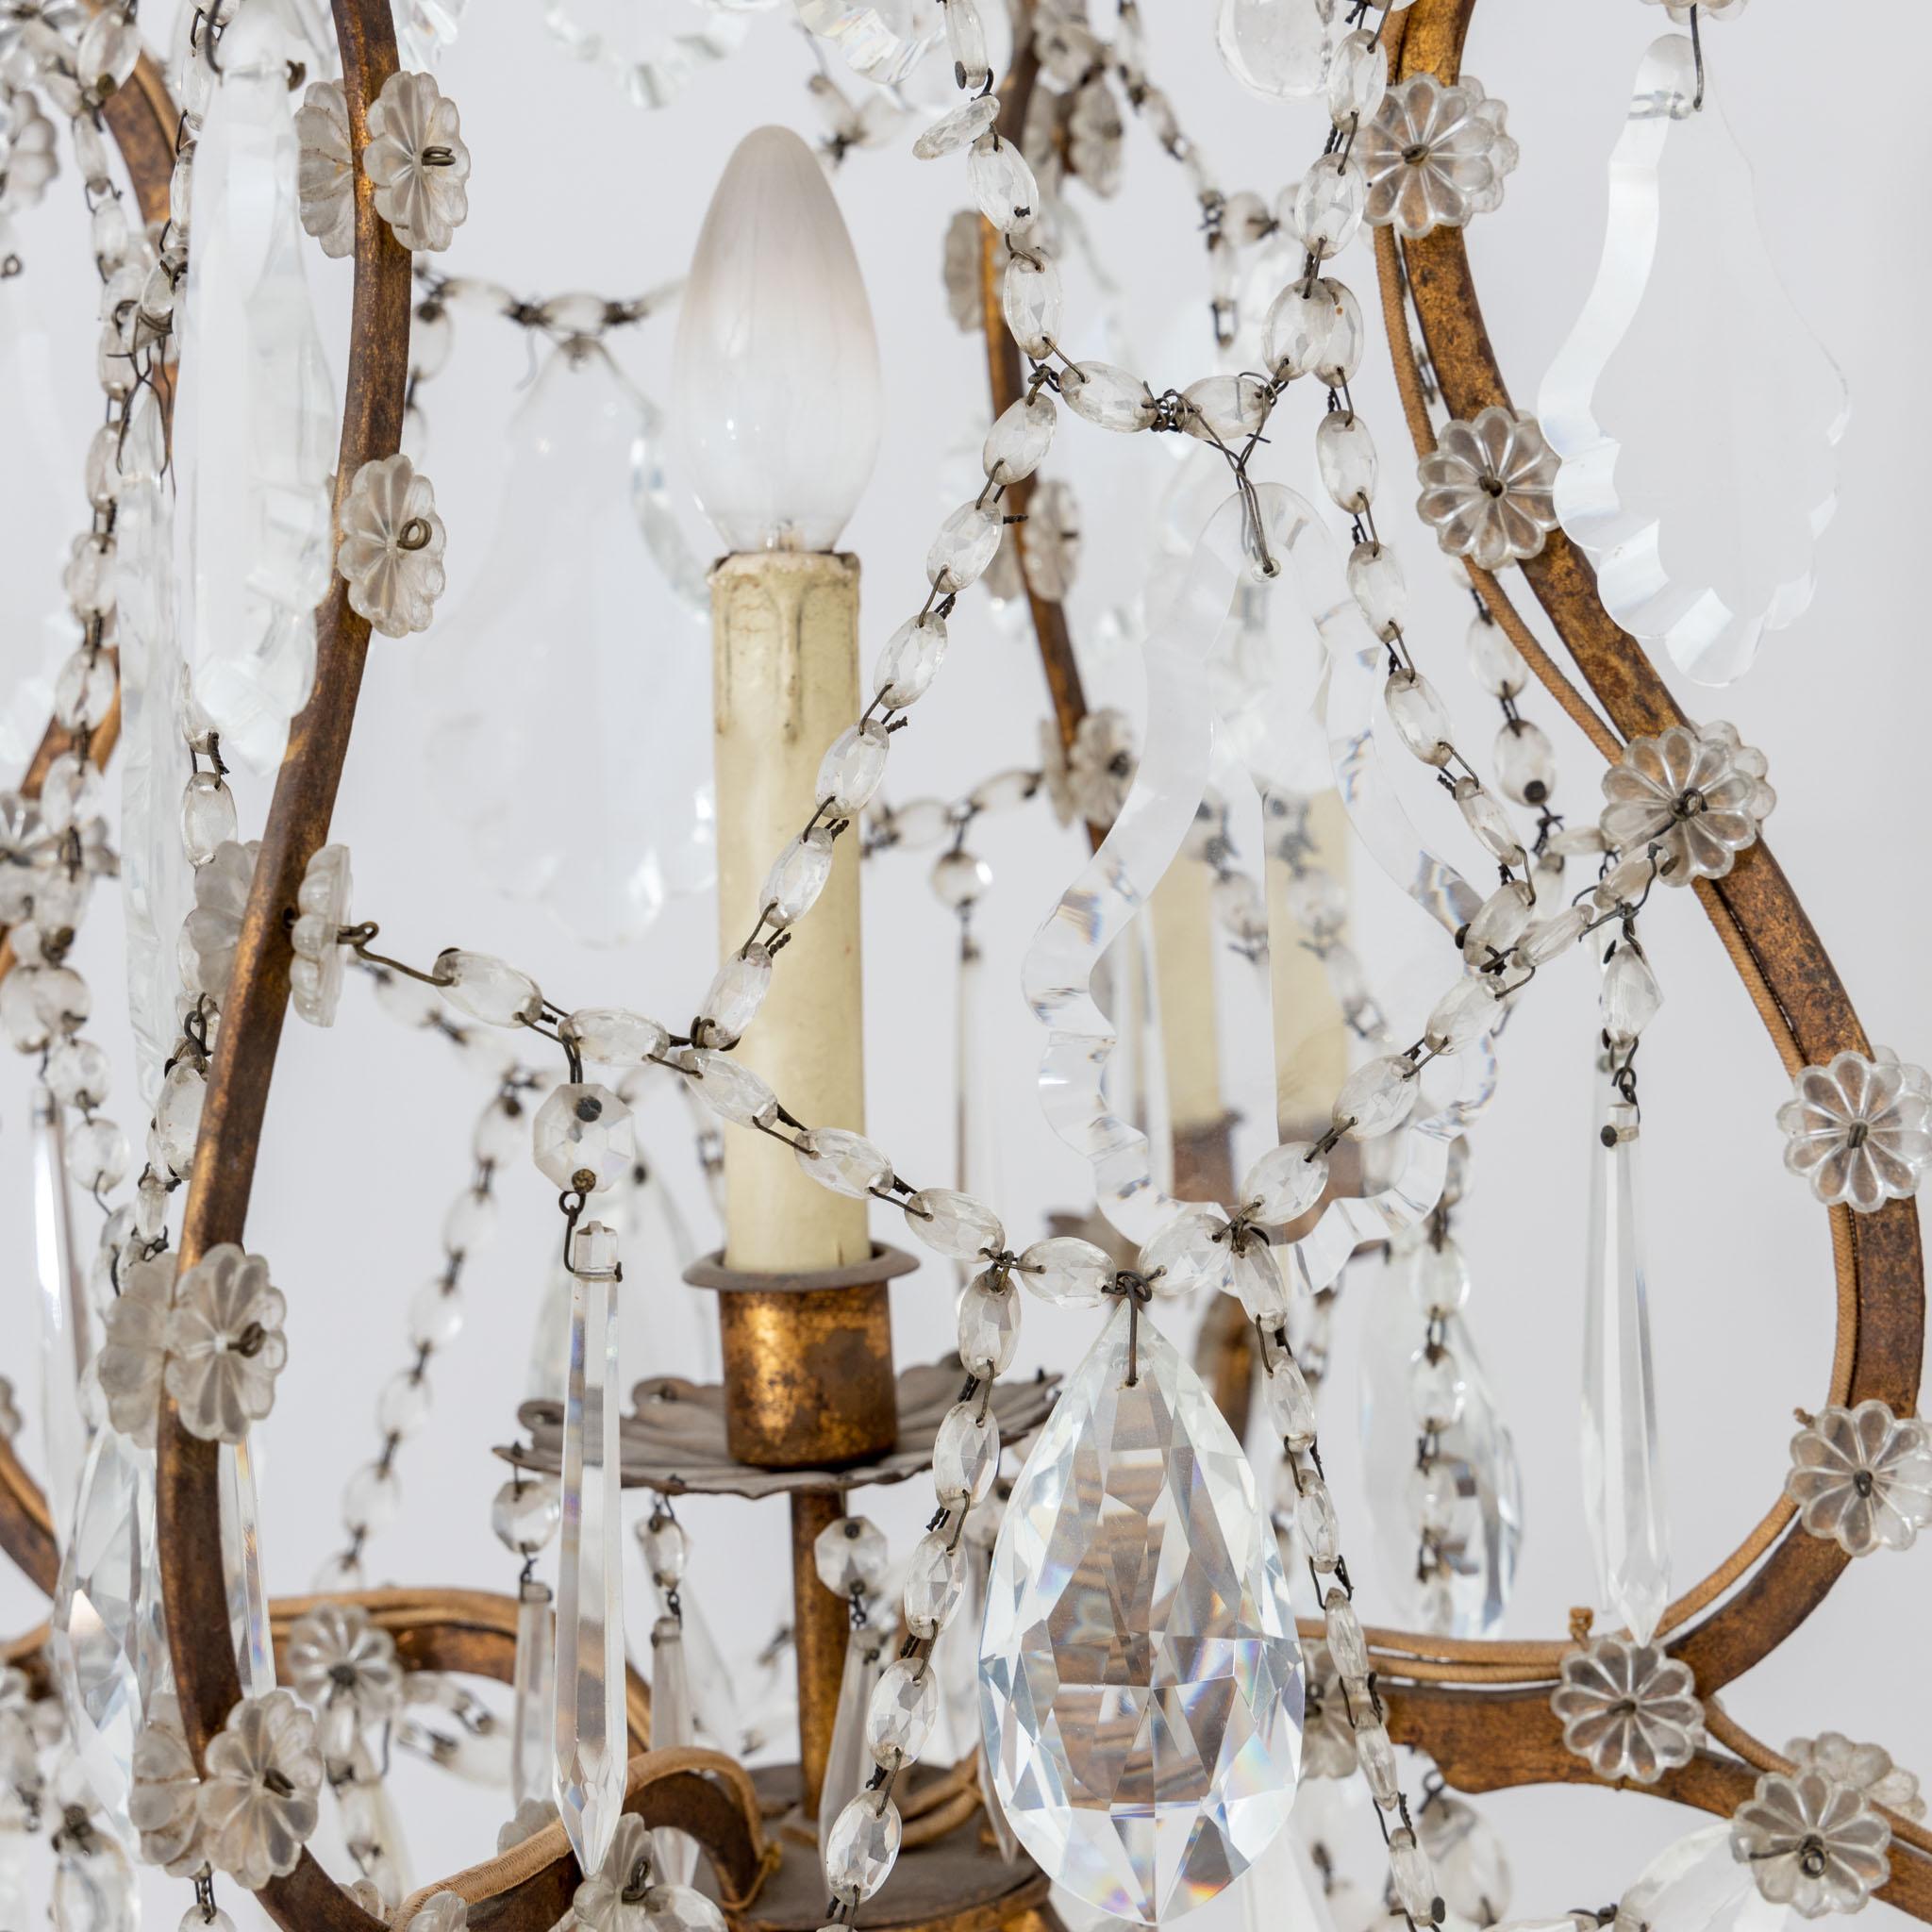 German Chandelier with five Sockets and Glass Prisms, 1st Half 20th Century For Sale